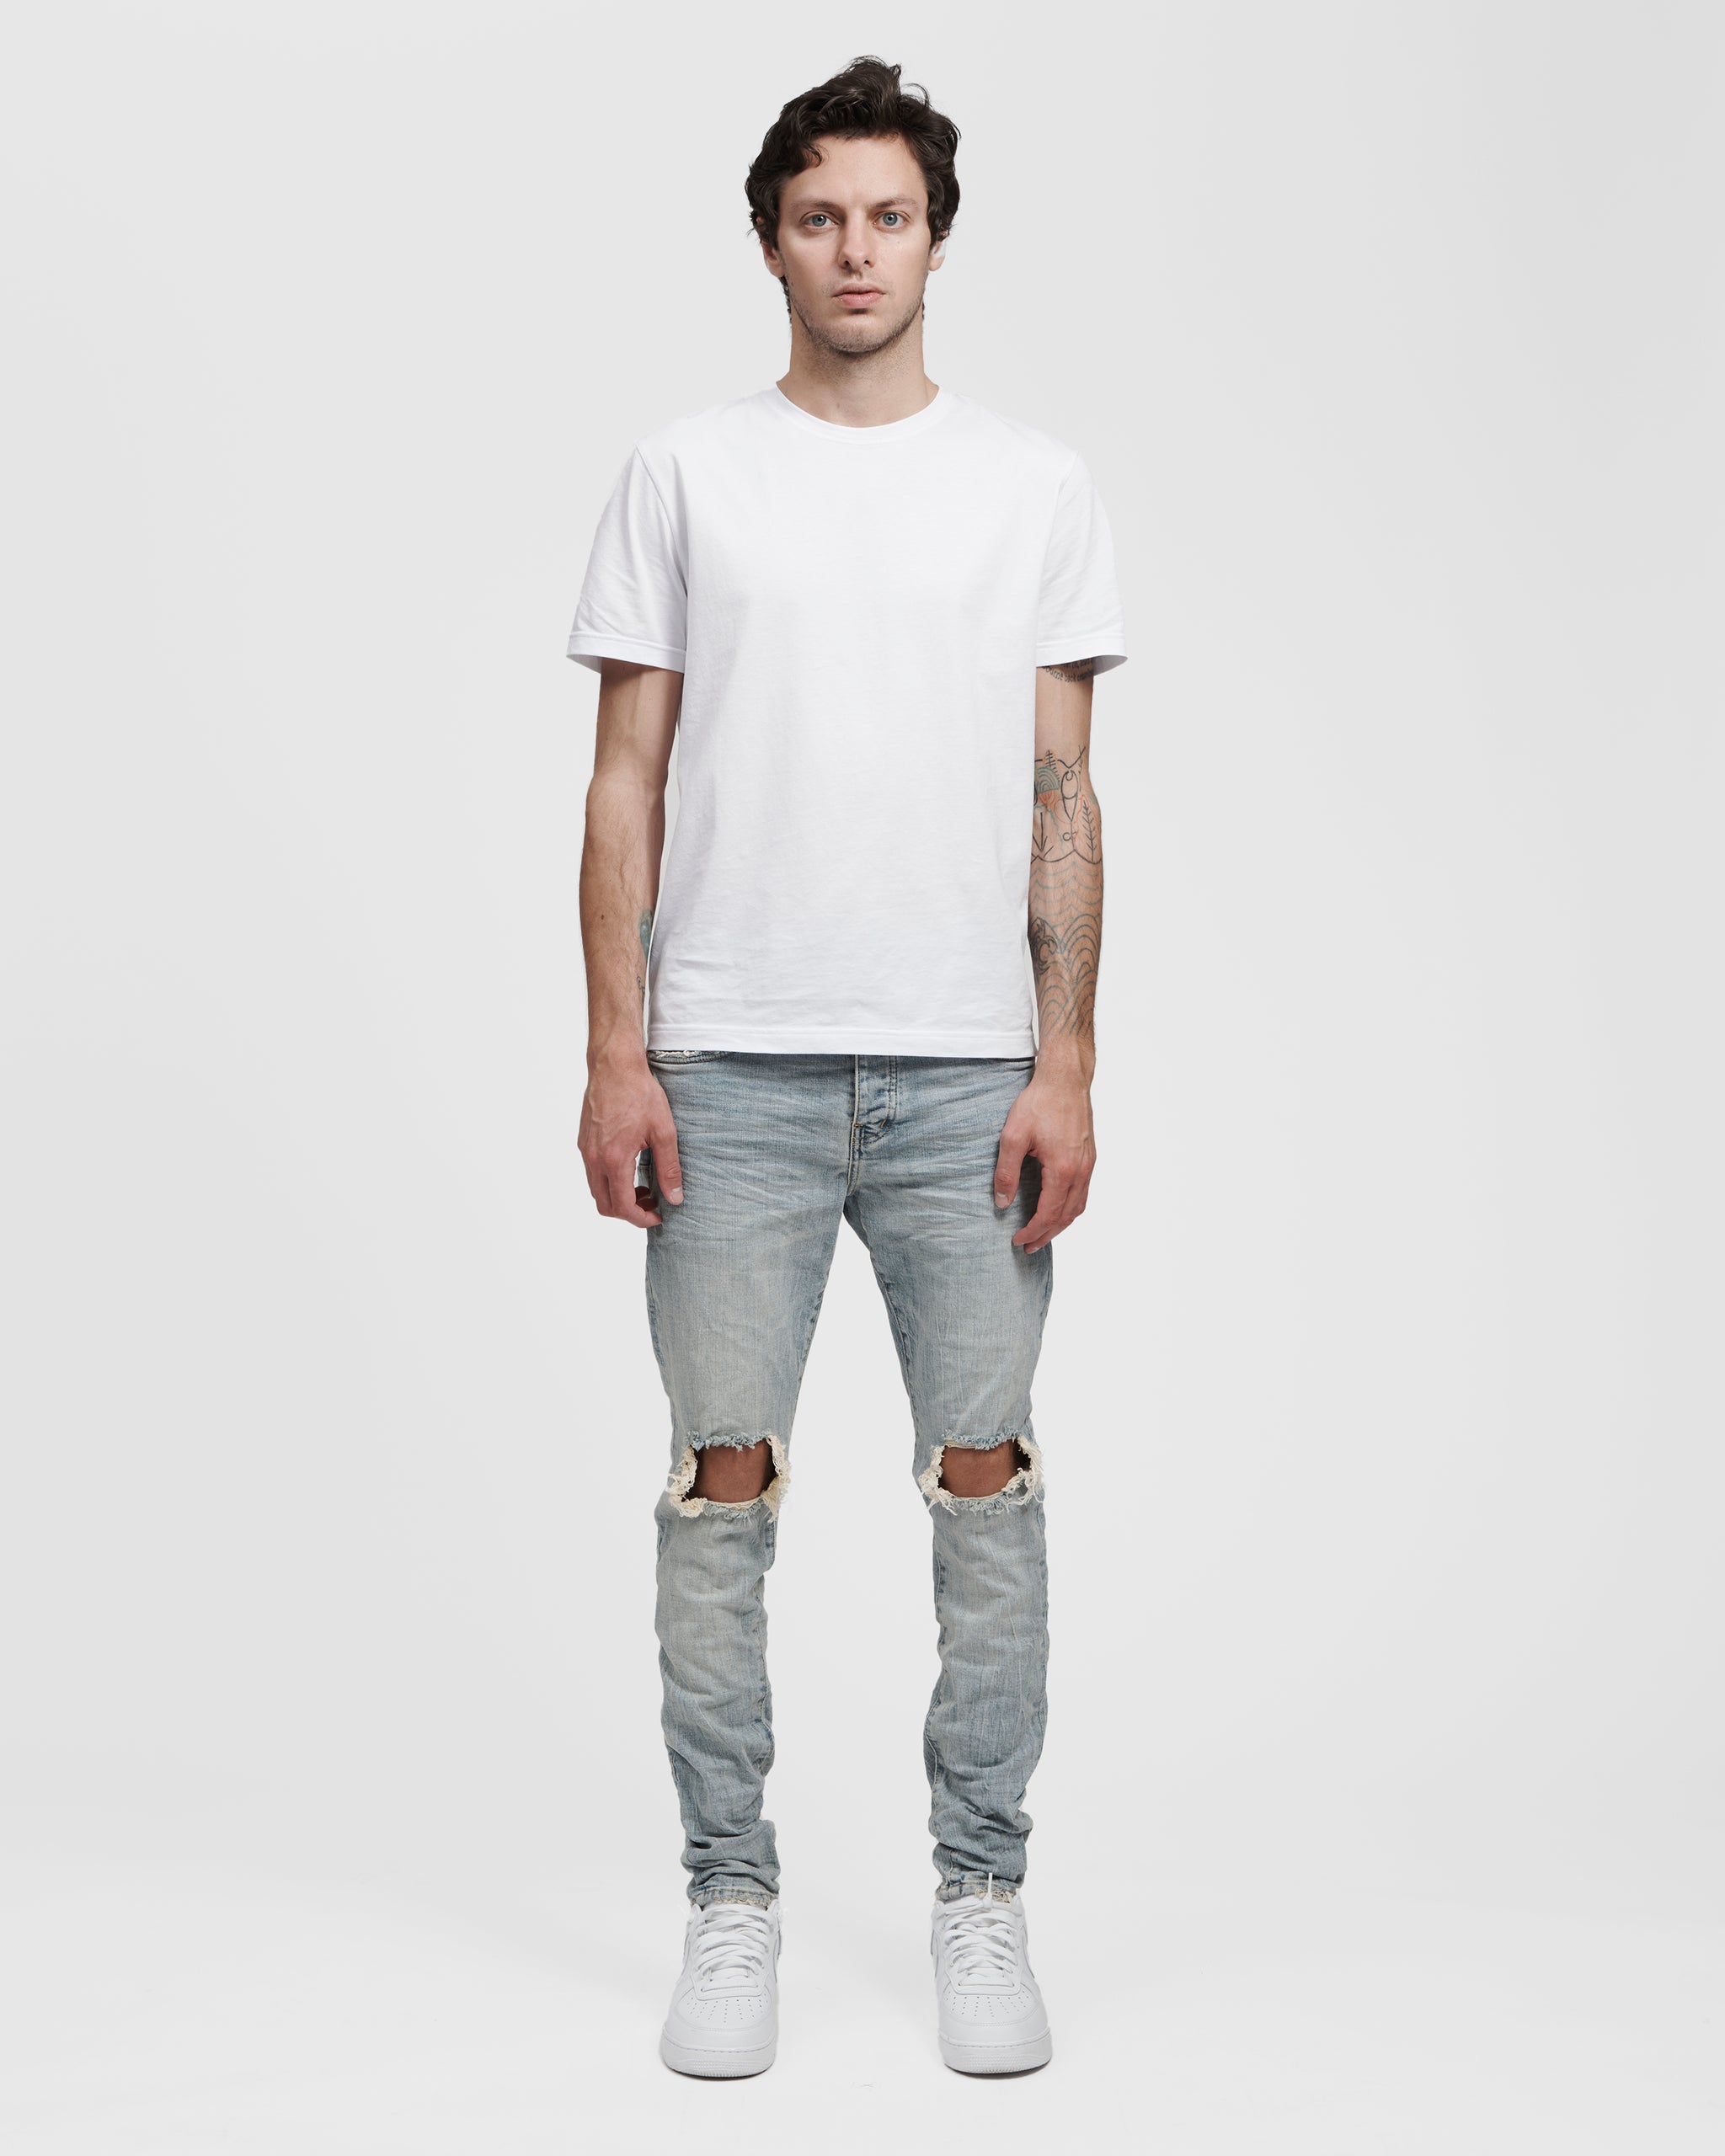 PURPLE BRAND, Mid Rise Distressed Jeans, Men, Tapered Jeans